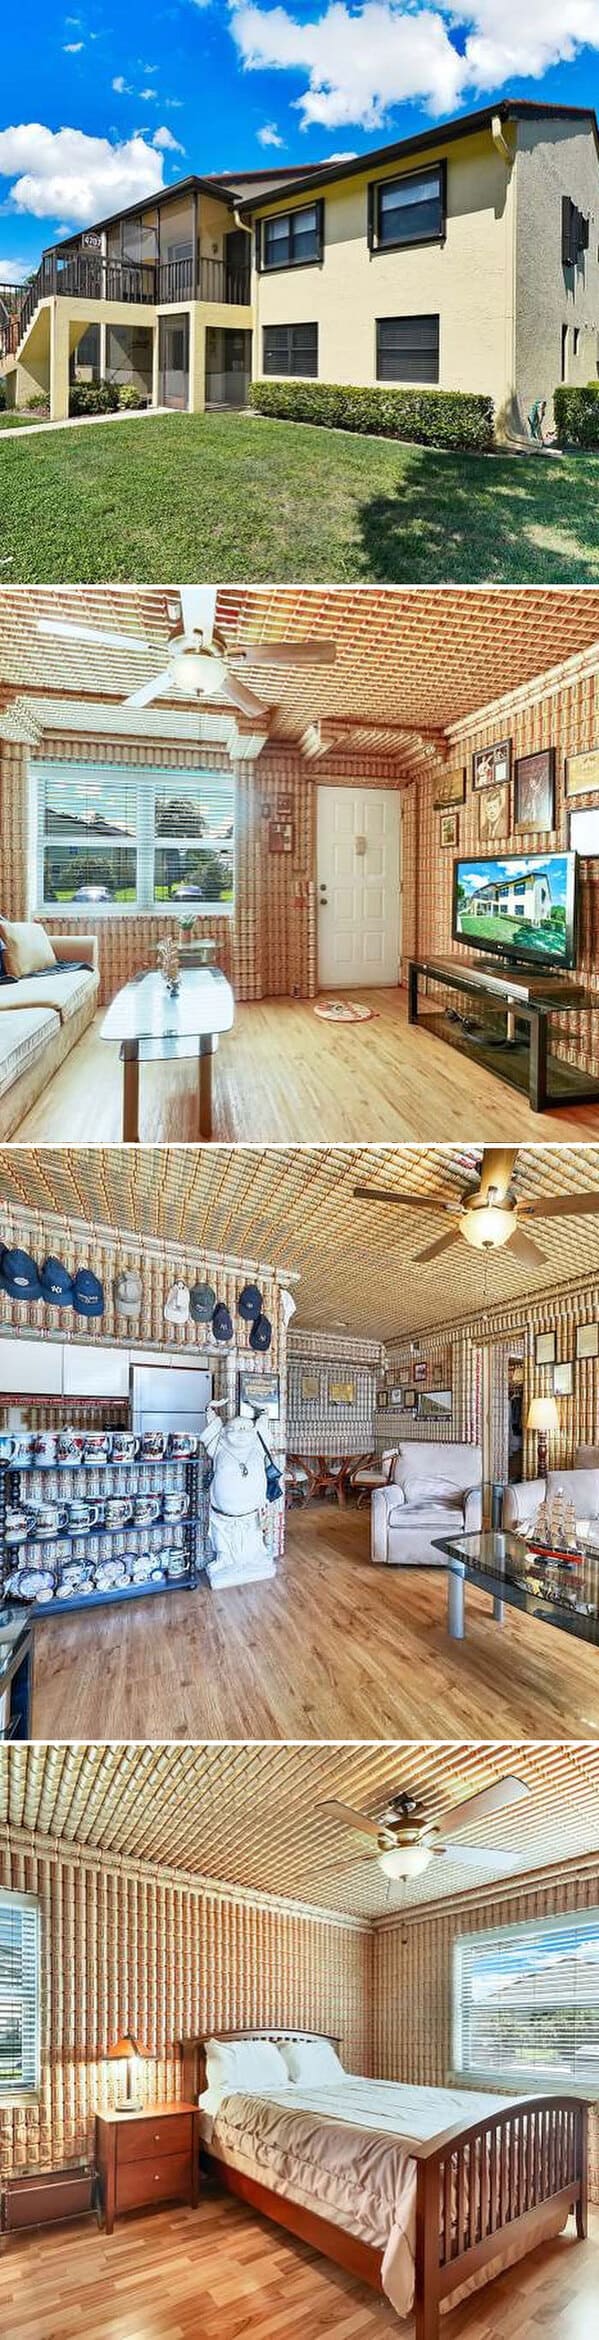 Zillow gone wild, weird and funny real estate listings, real estate agents who did extra, lol, funny pics of houses, ridiculous houses to buy, zillowgonewild, instagram, humor, funny pics